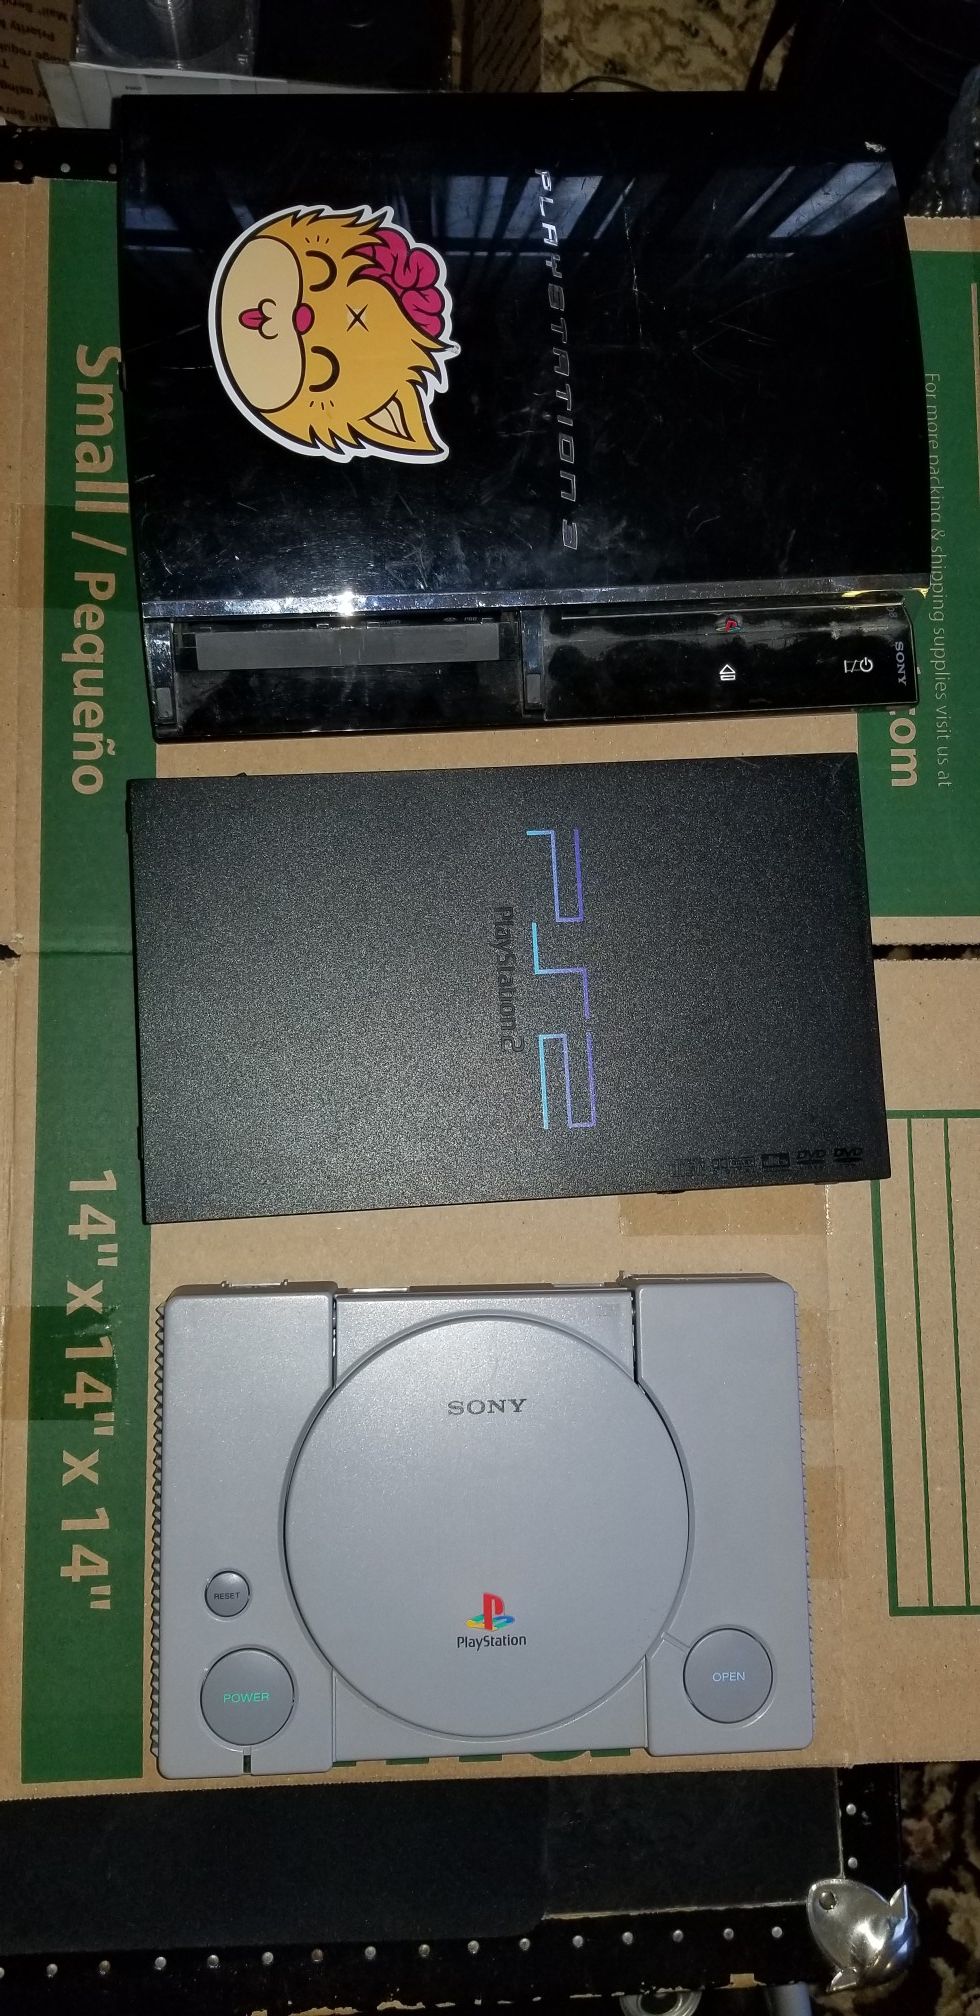 PS1, PS2, PS3 and Games